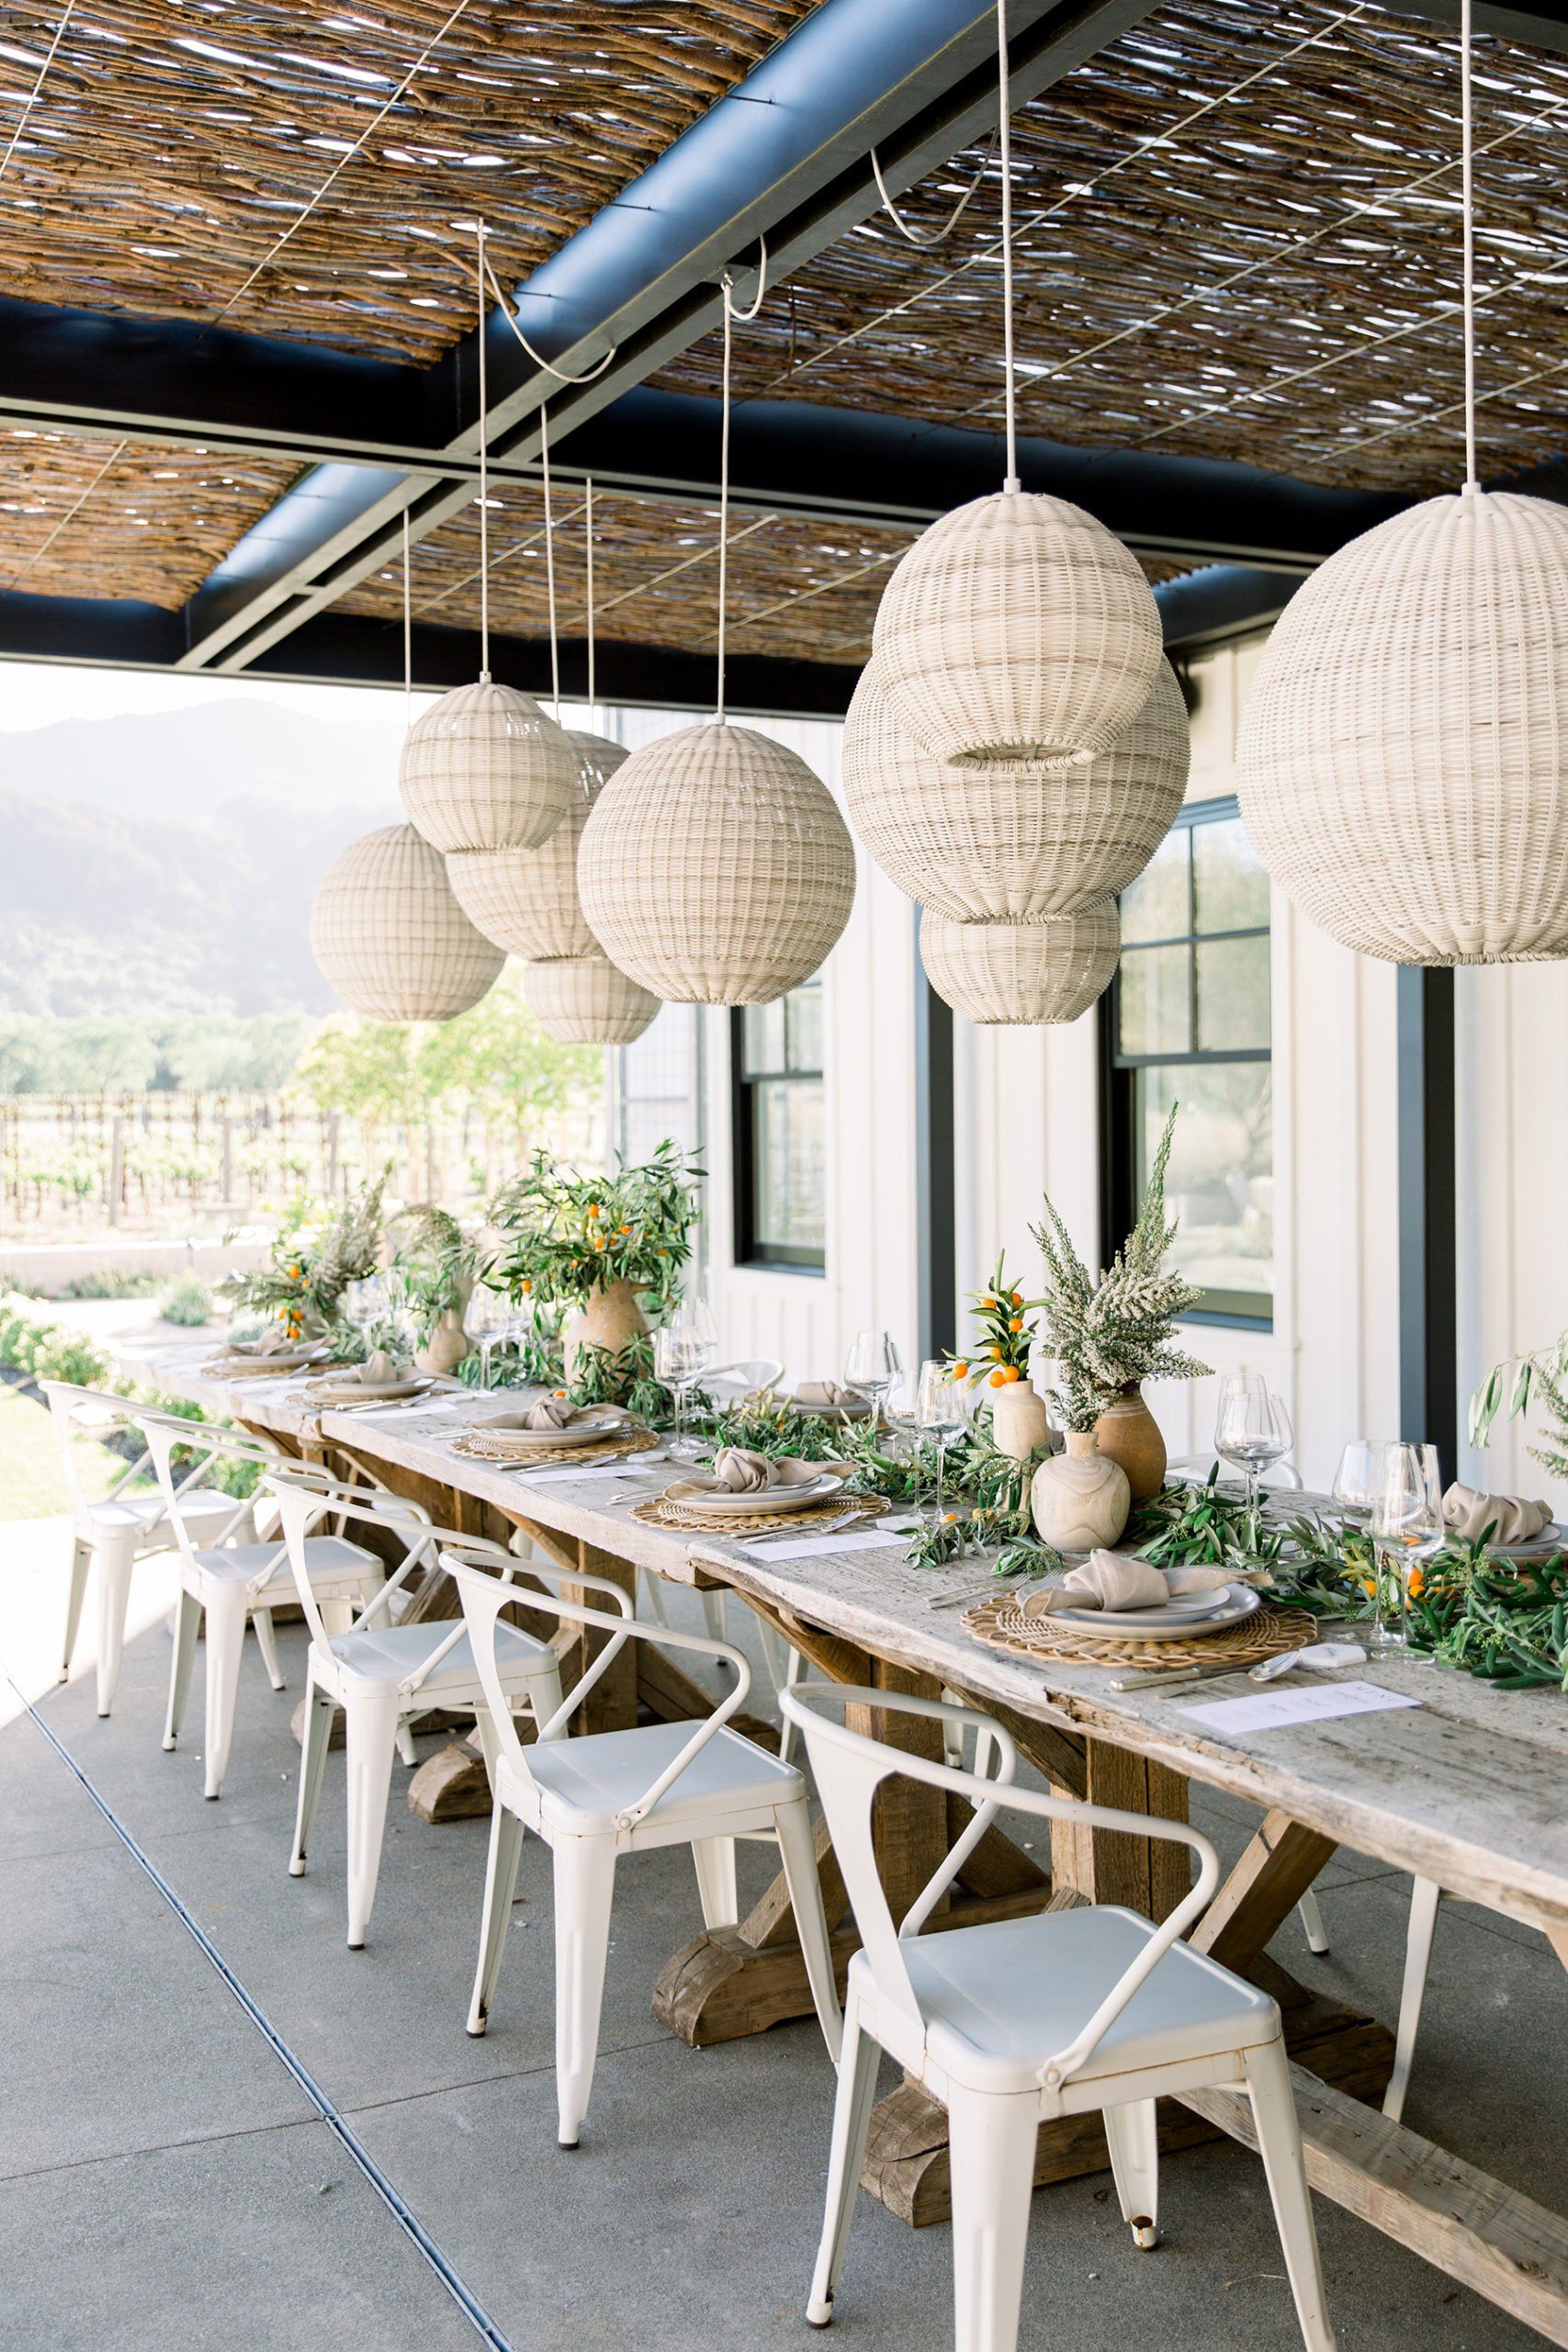 A long wooden table with white chairs under a canopy.